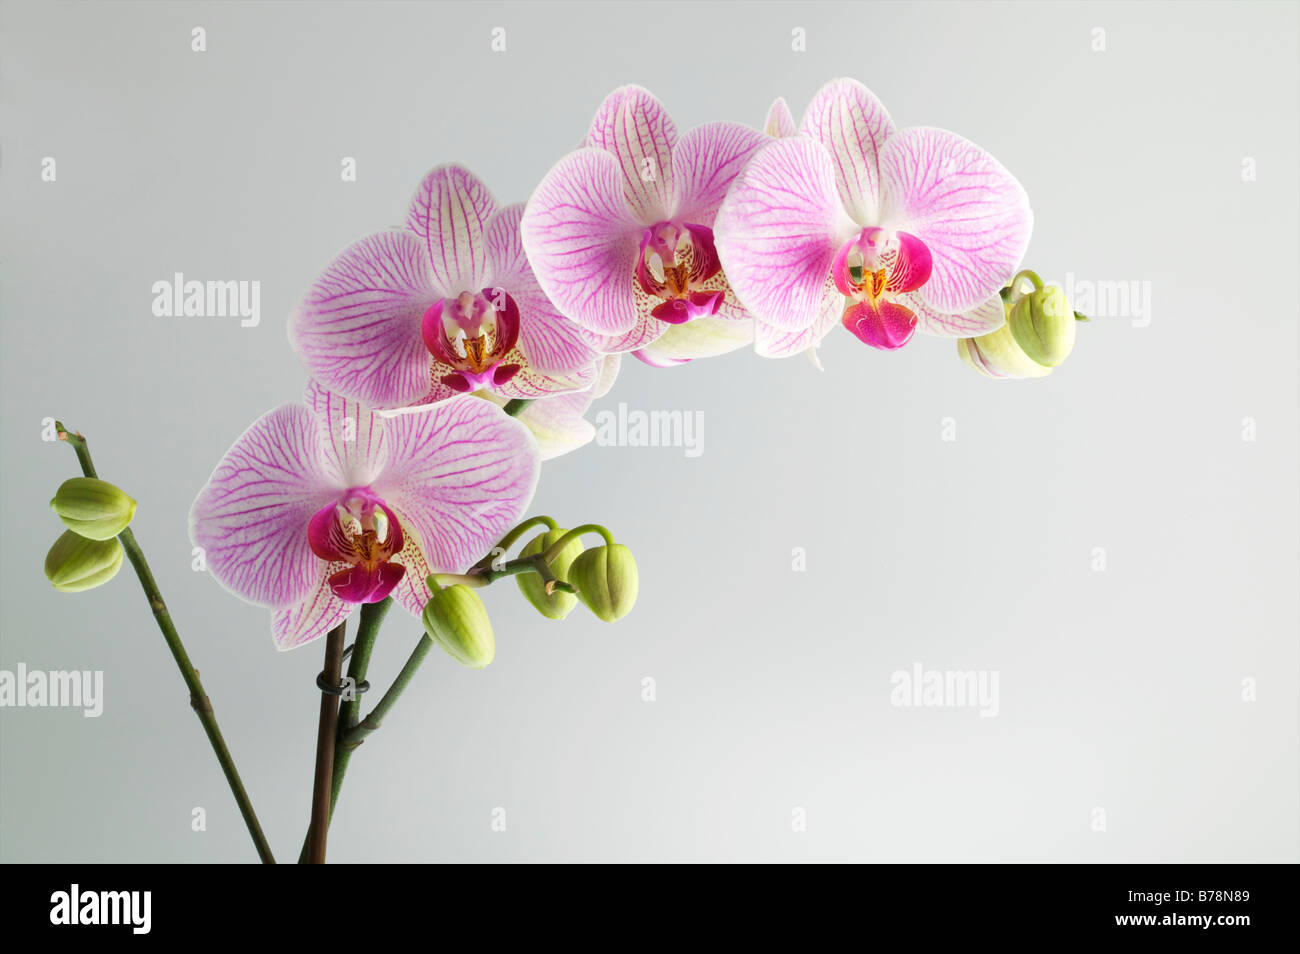 Phalaenopsis Orchid or moth orchid pink flowering plant full heads mothers day gift poster lovers plant Stock Photo